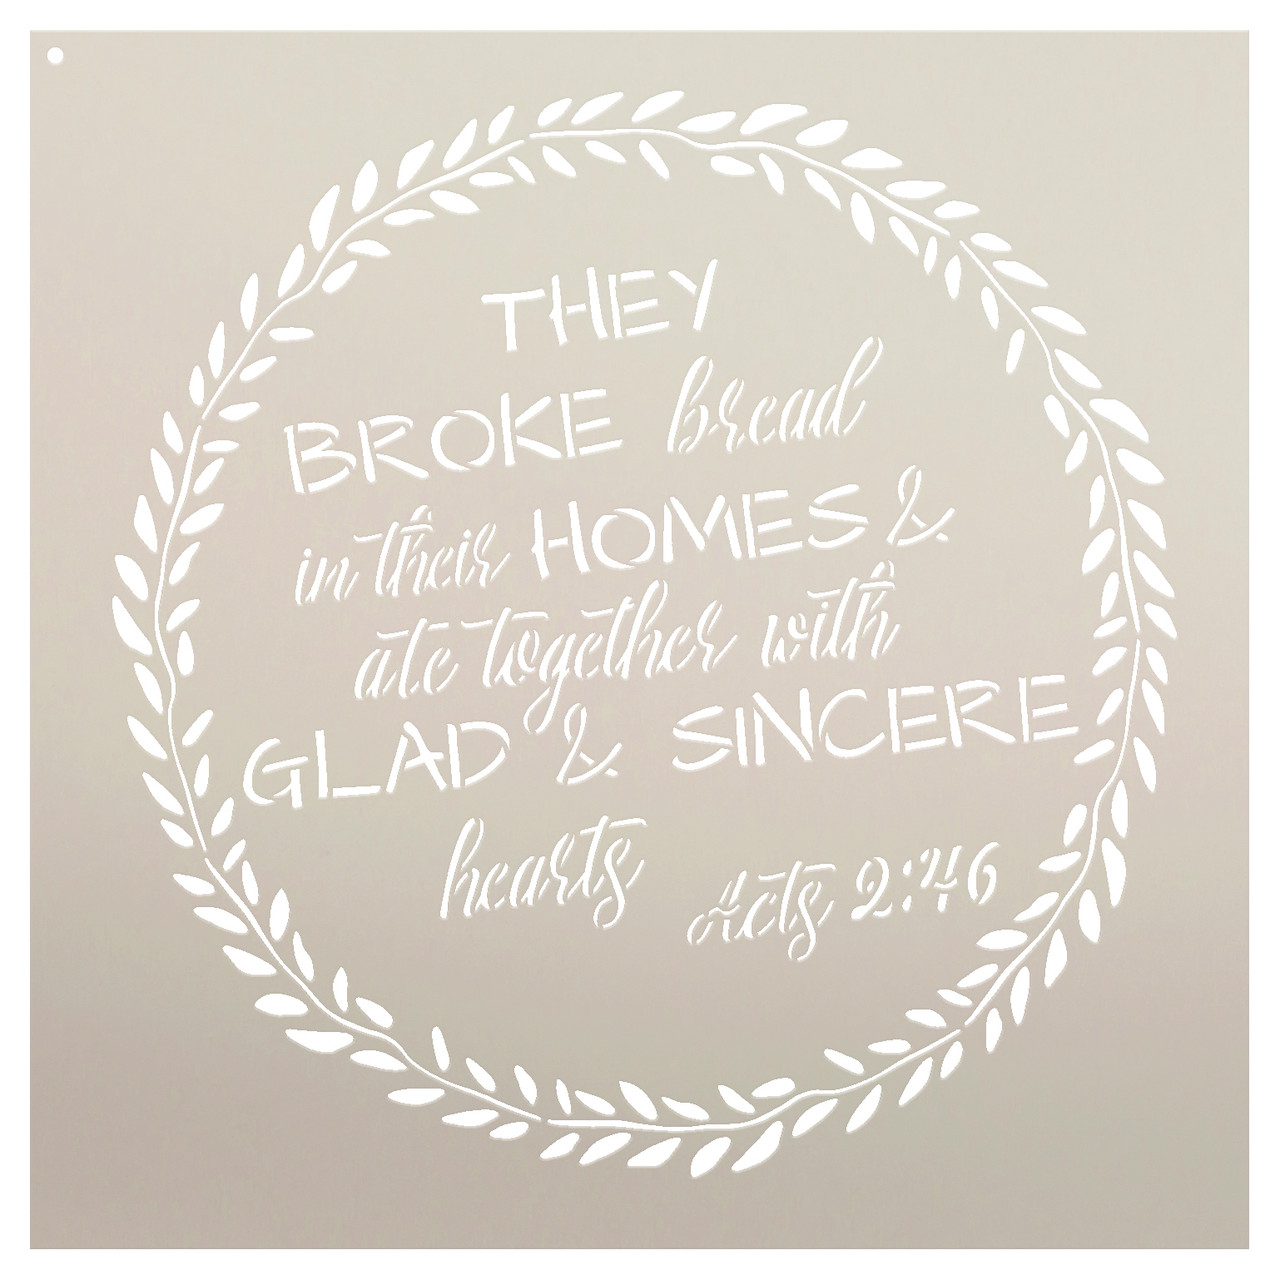 Glad & Sincere Hearts - Acts 2:46 Stencil by StudioR12 | Reusable Mylar Template | Use to Paint Wood Signs - Pillows - DIY Scripture Decor - Select Size